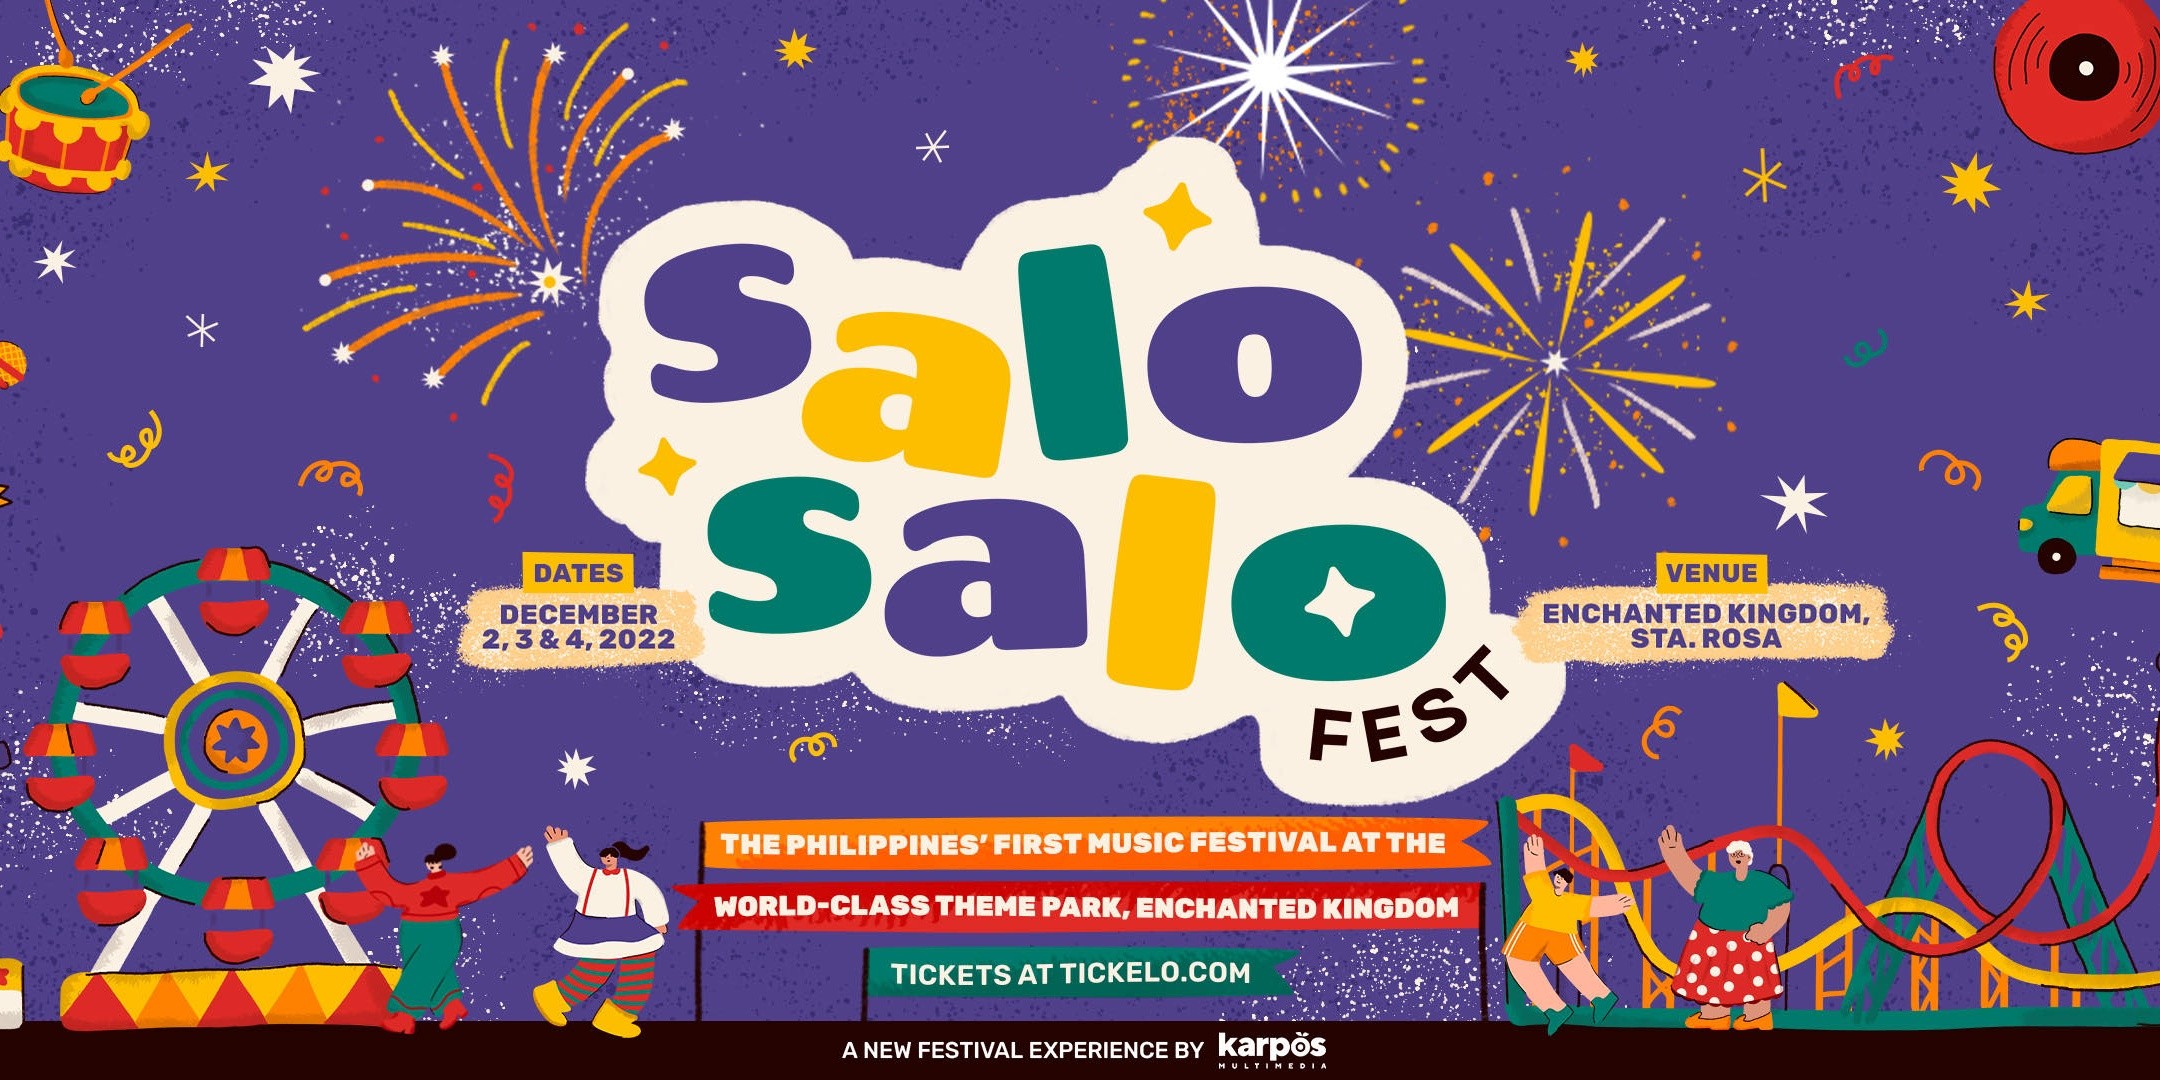 6 things to do at the Philippines' first theme park music festival, Salo-Salo Fest